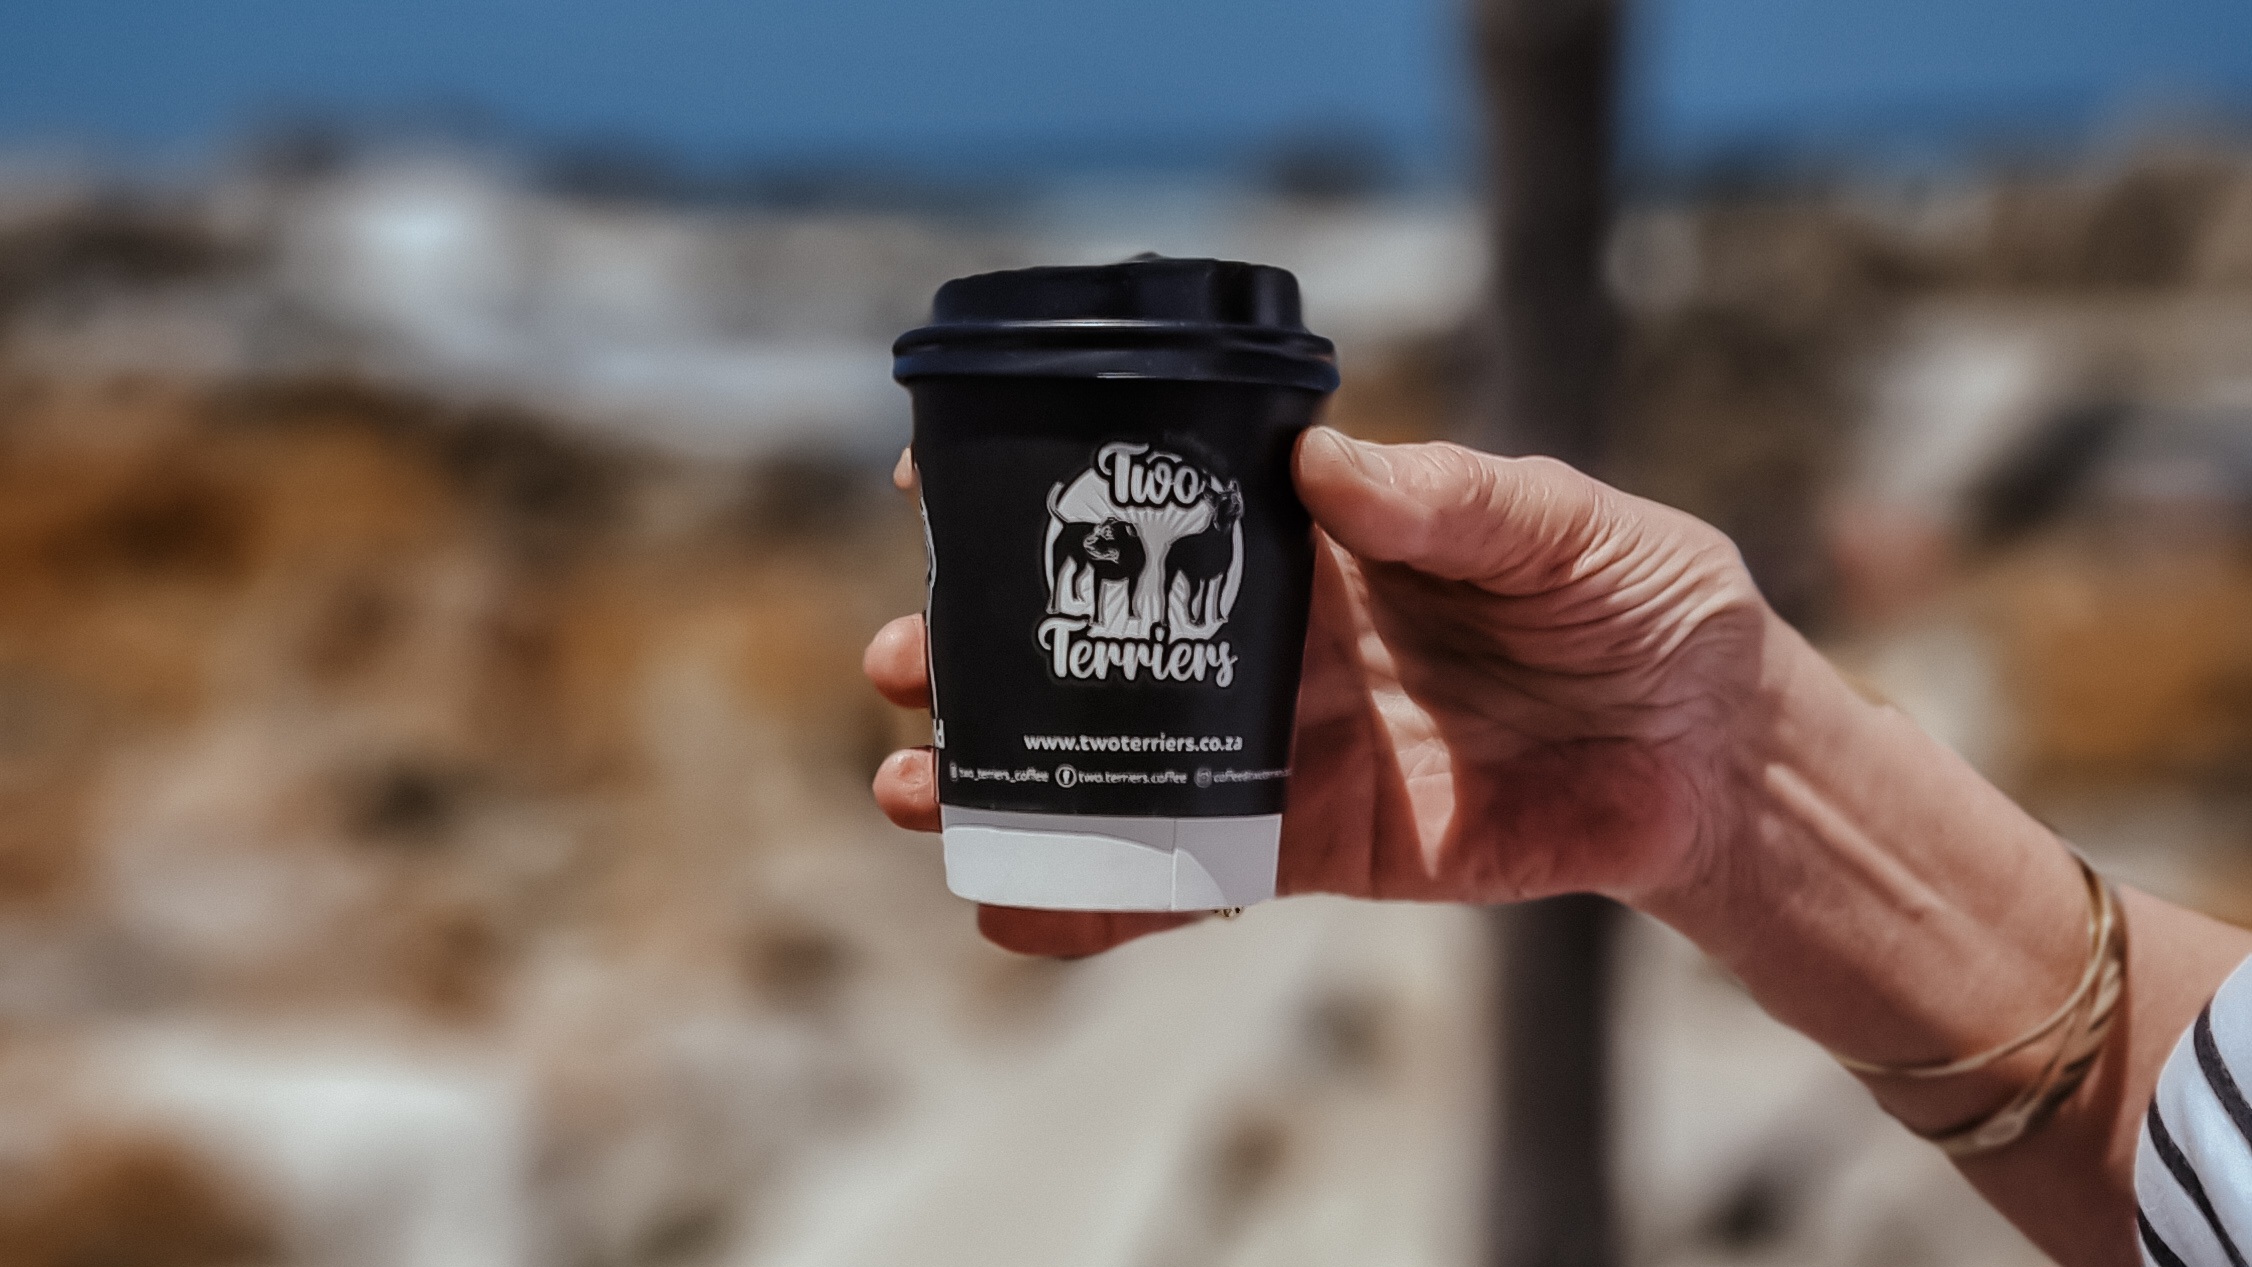 Branded cup at rocks of old harbour in Betty's Bay, Cape Town